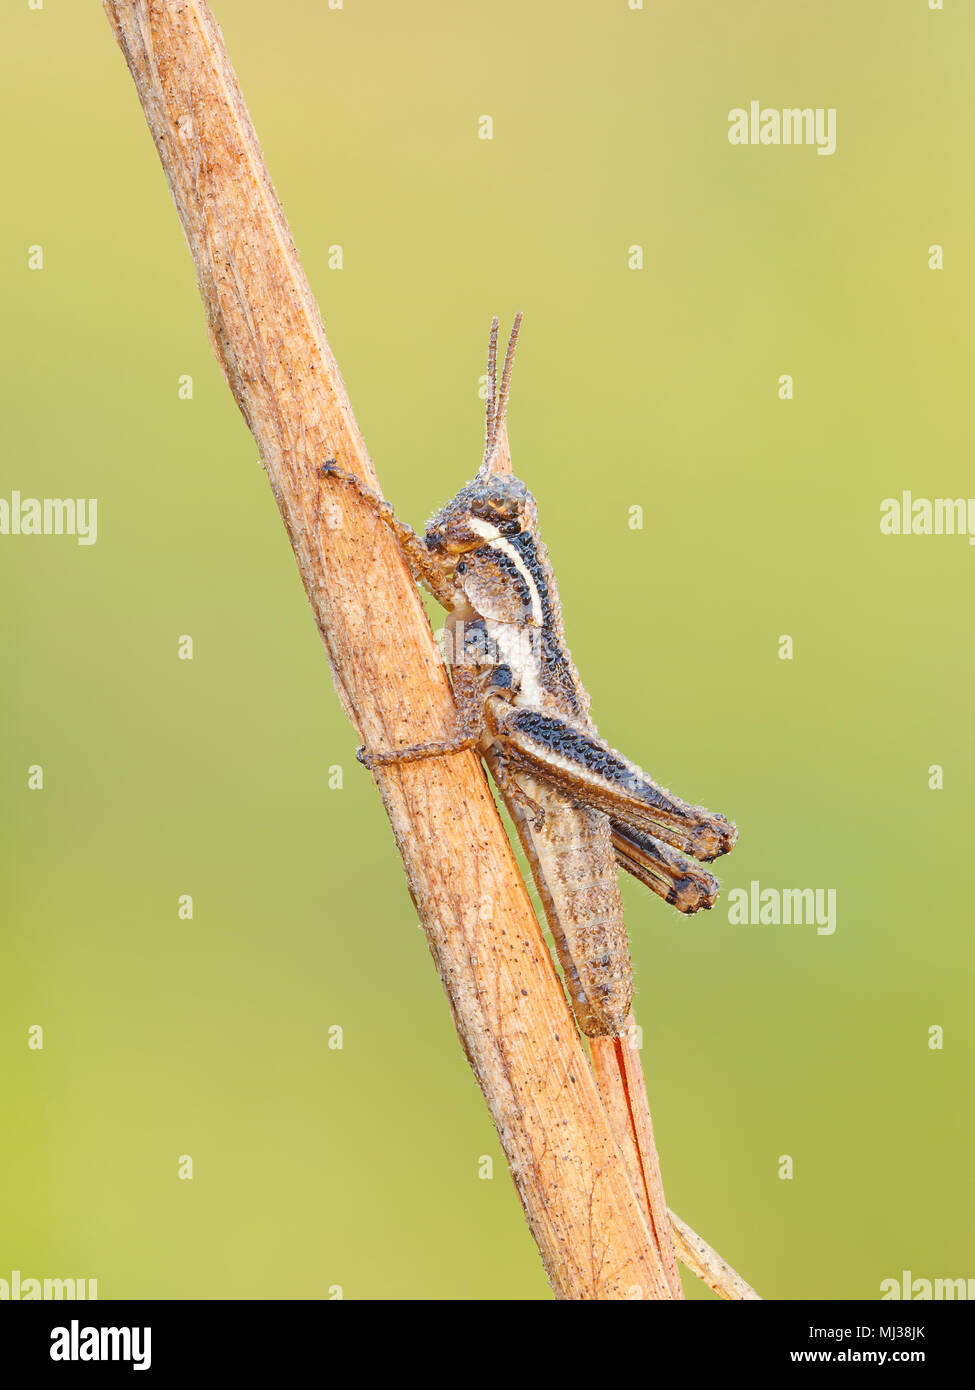 A dew-covered Spur-throated Grasshopper (Paroxya sp.) nymph perches on a plant stem in the cool air of early morning. Stock Photo